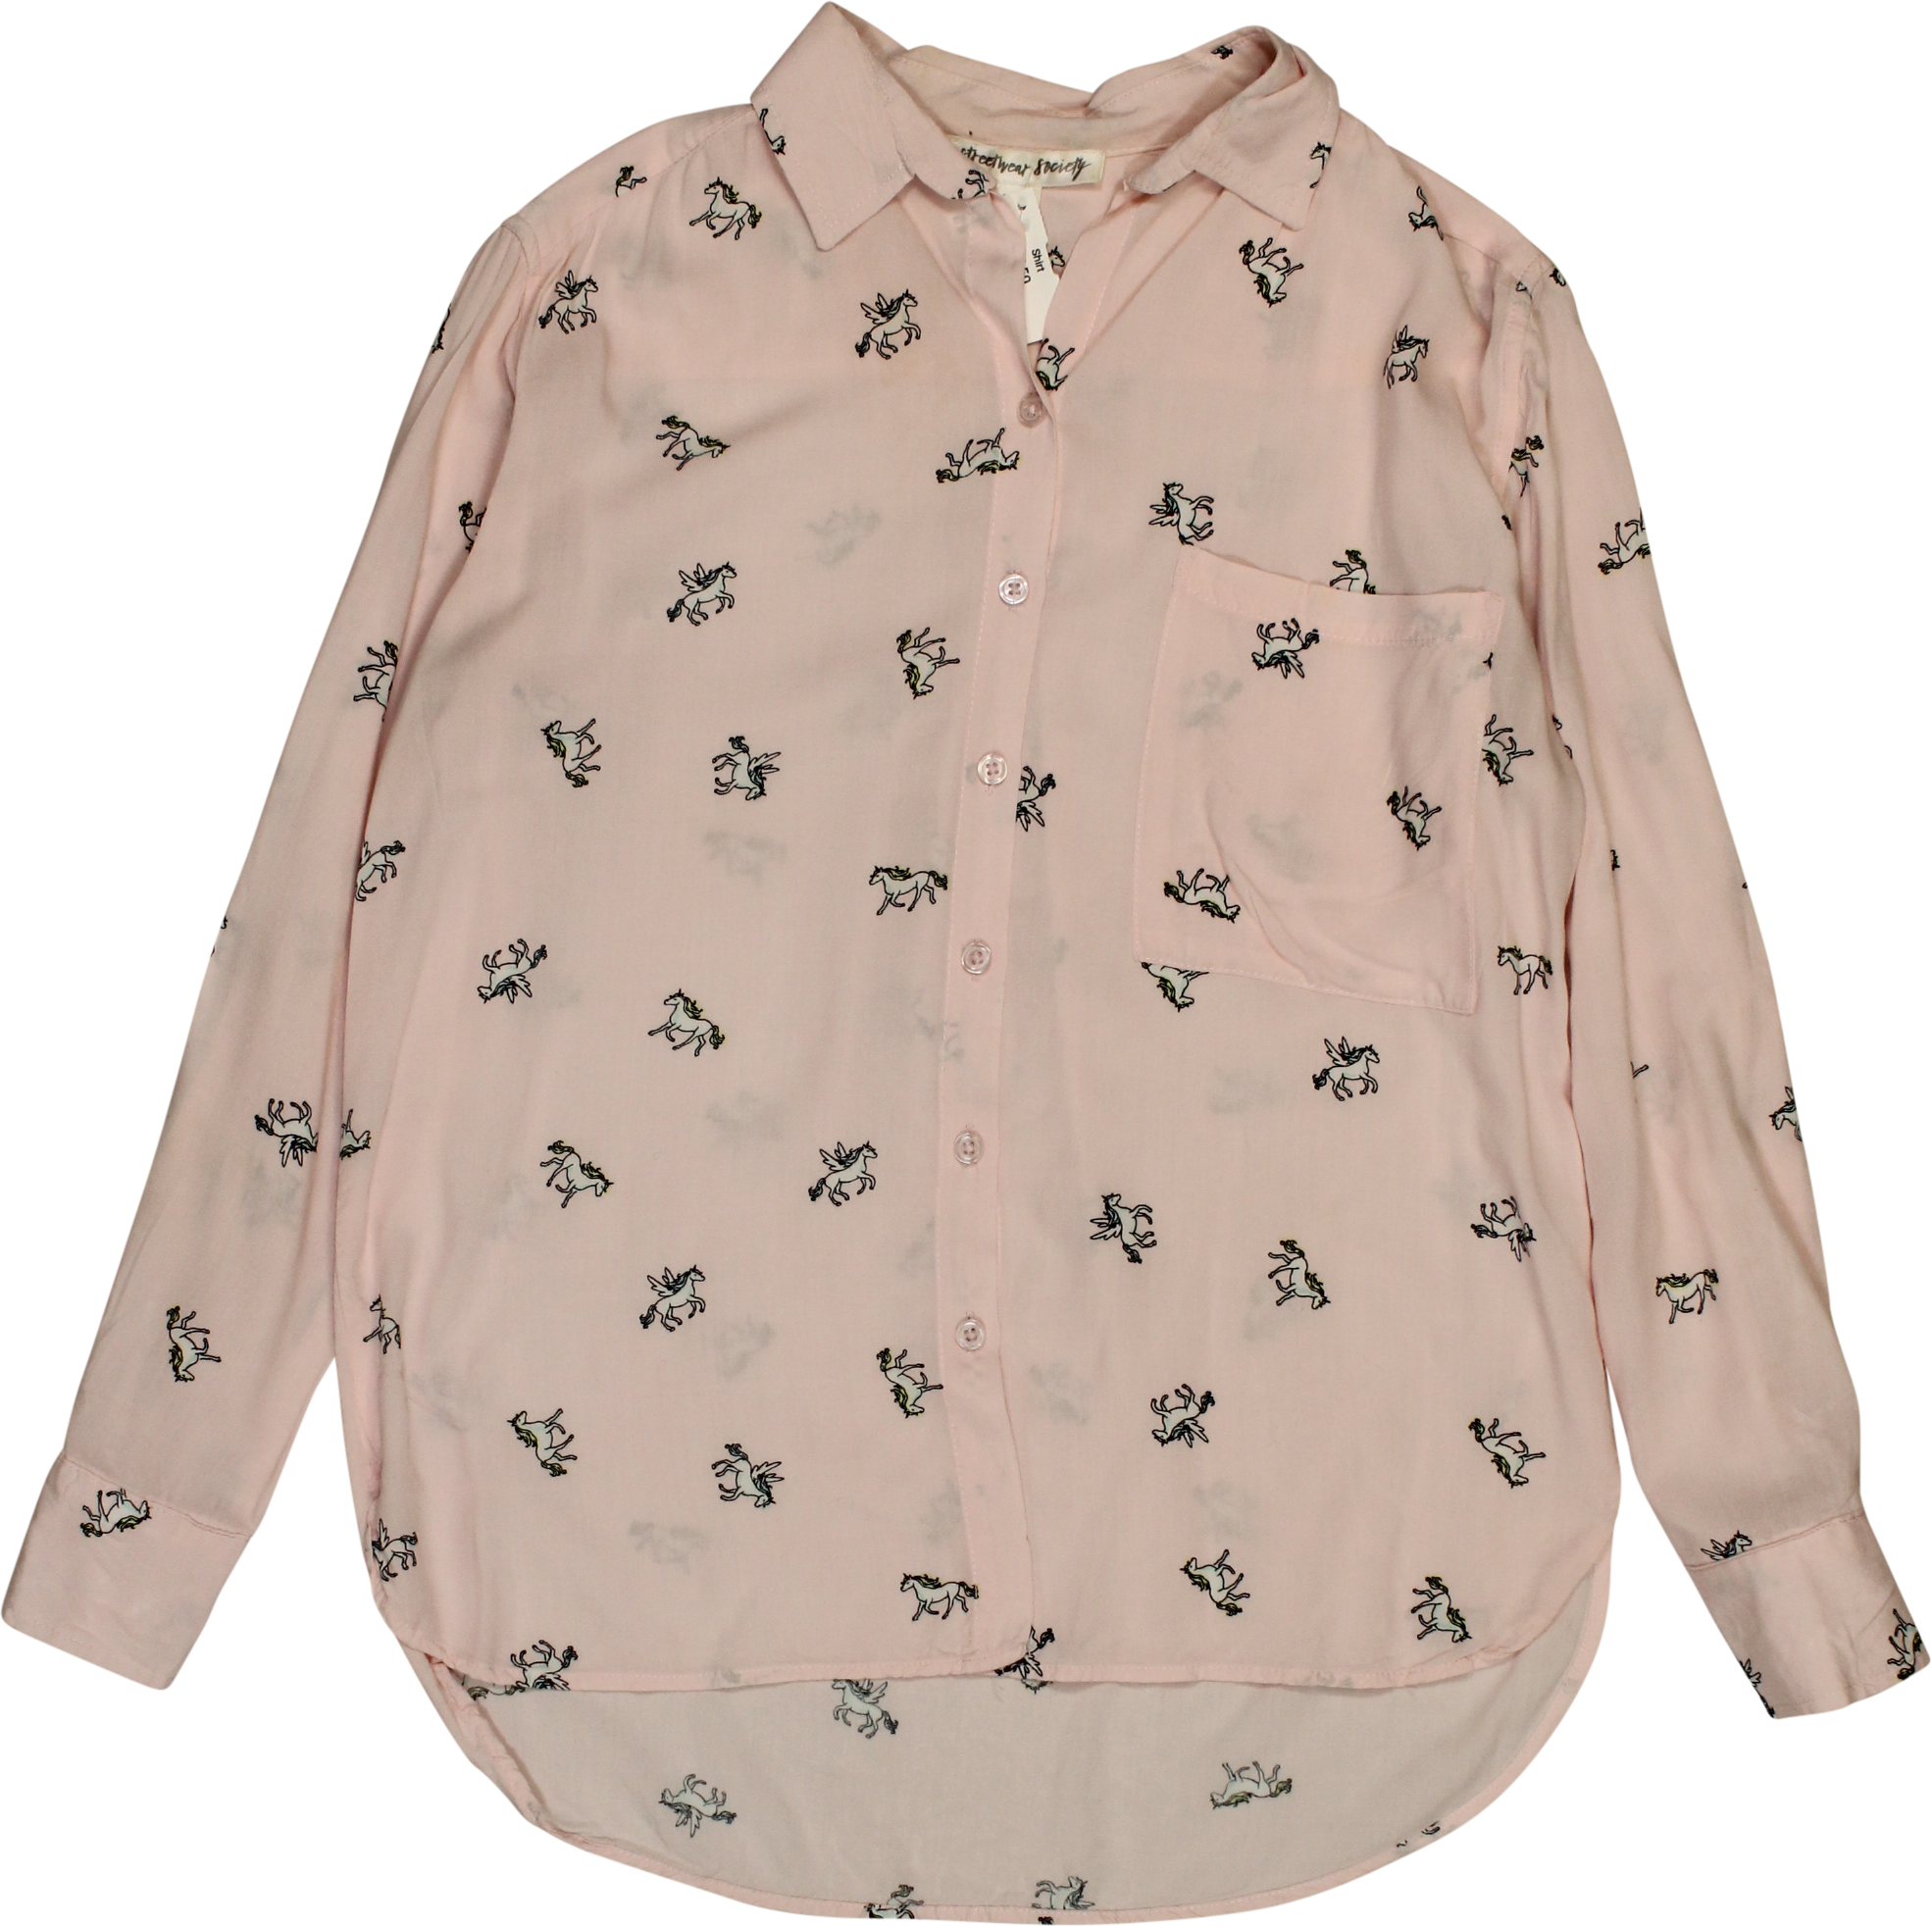 Streetwear Society - Unicorn Pyjama Top- ThriftTale.com - Vintage and second handclothing